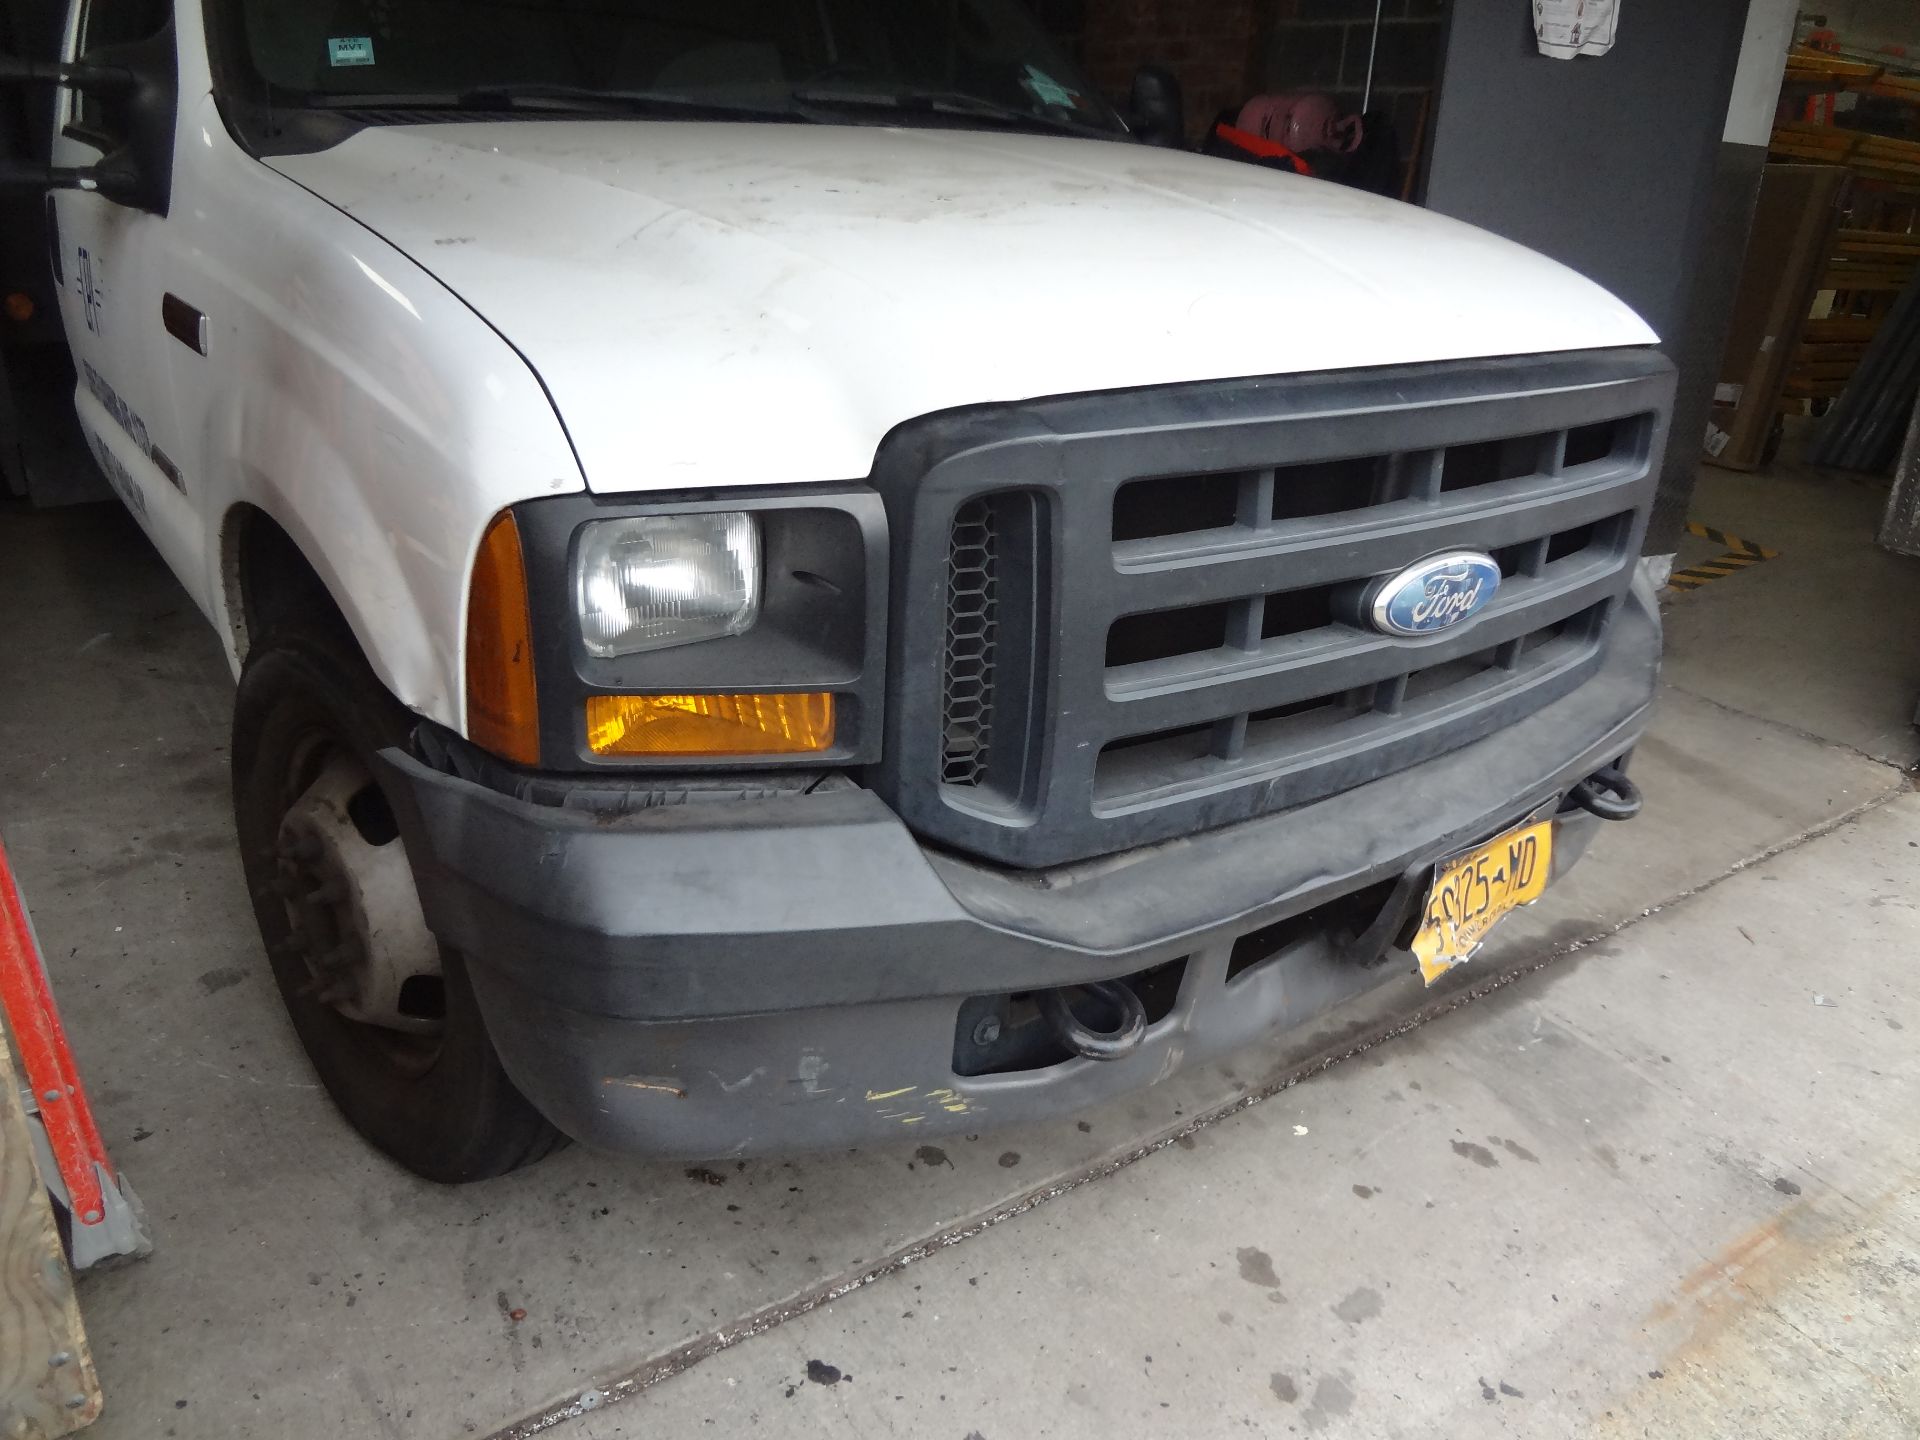 2007 FORD F-350XL SUPER DUTY 12' STAKE BODY TRUCK - Image 8 of 21